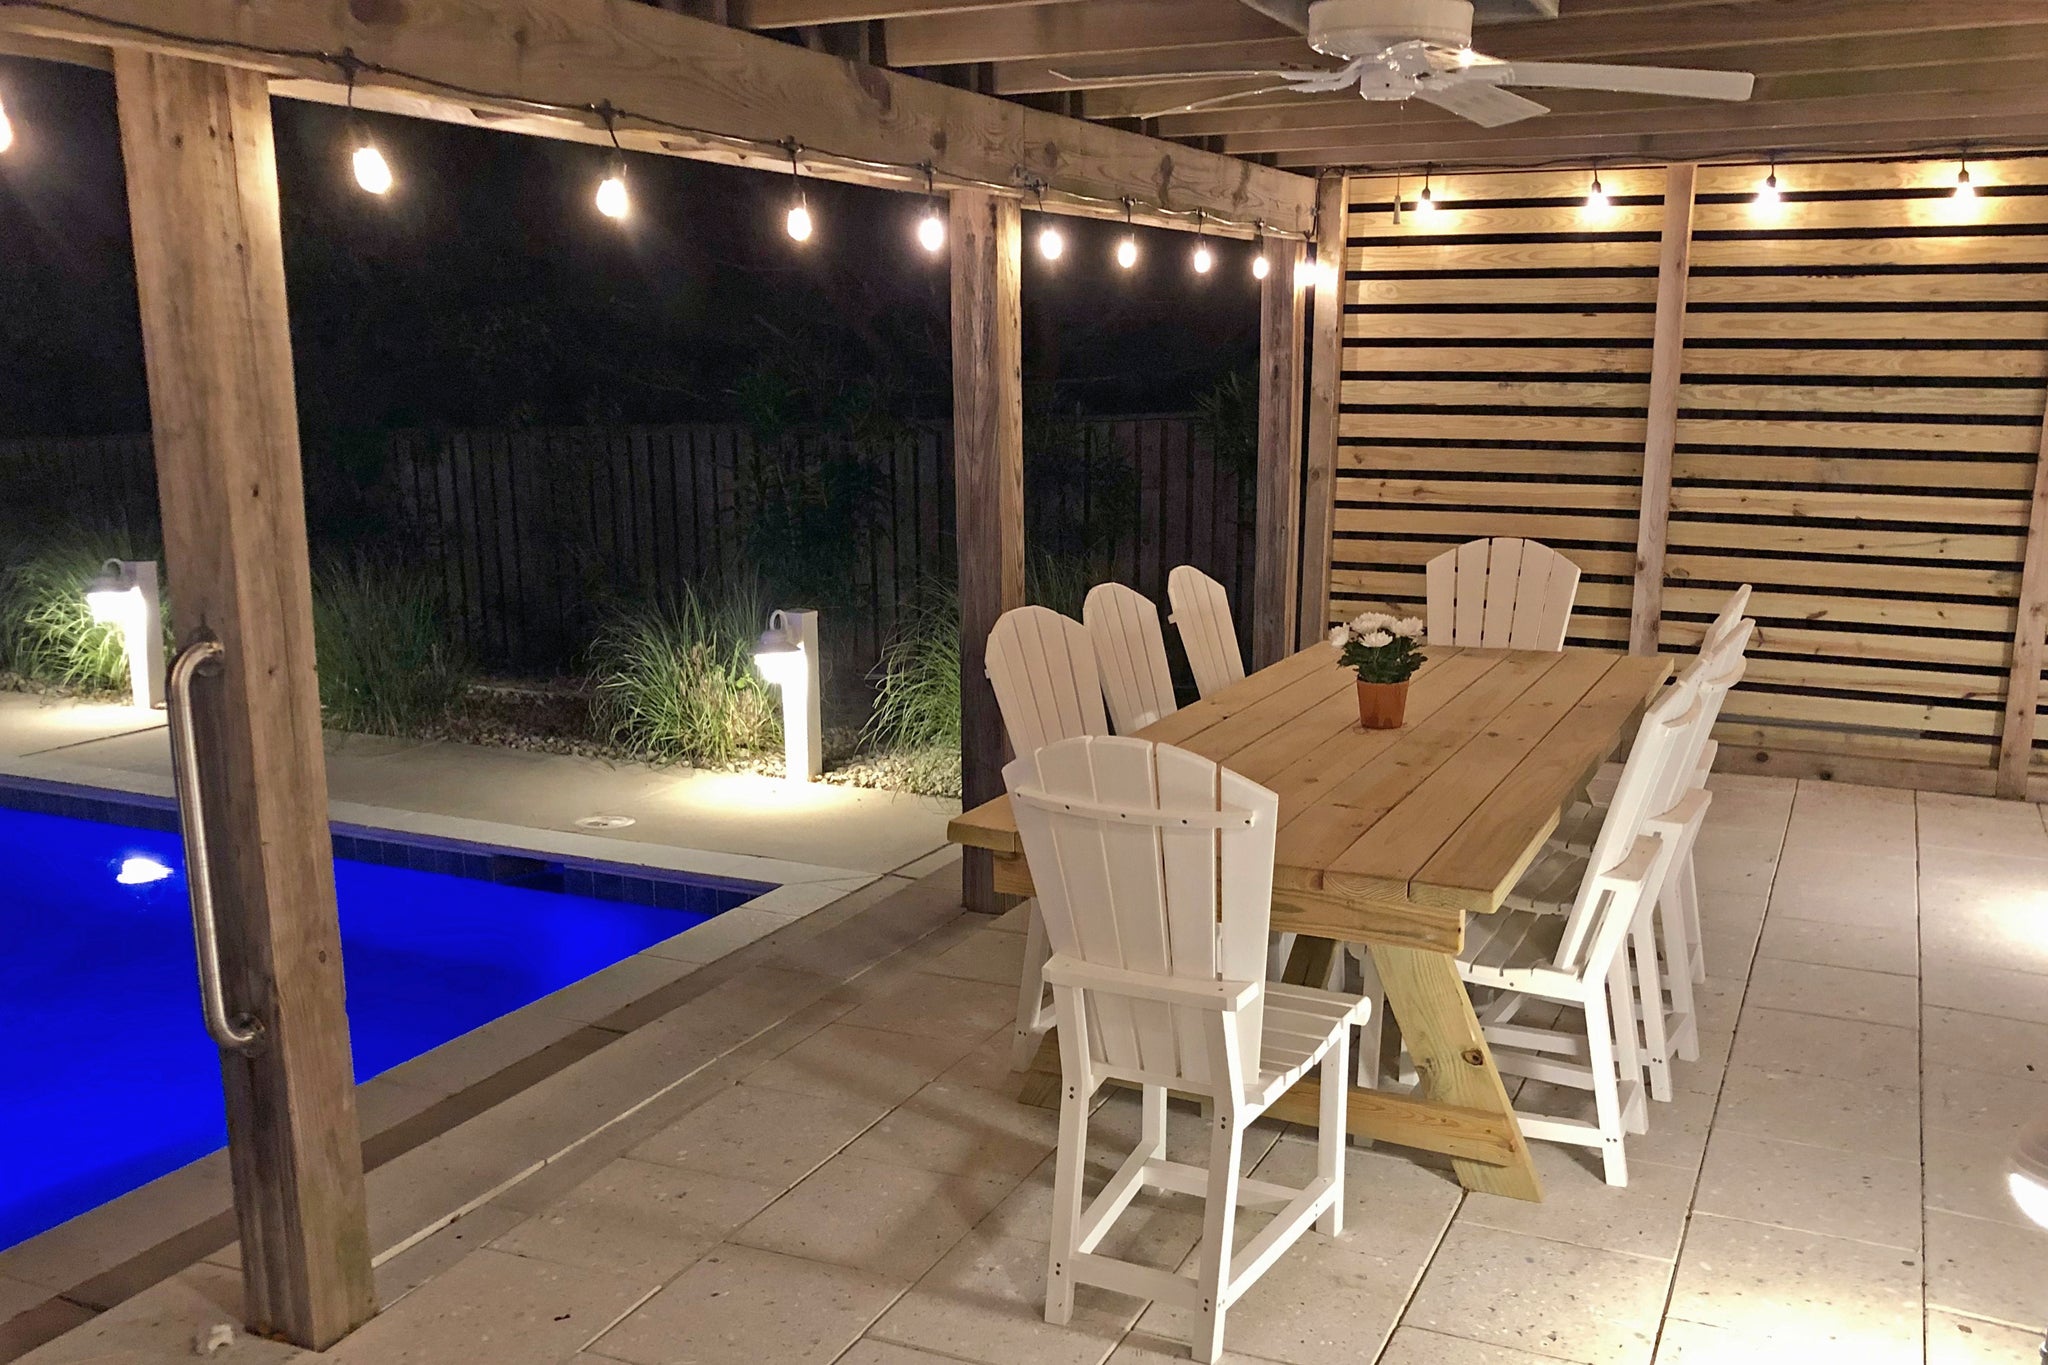 DU100: Duck Side Of The Moon | Bottom Level Patio At Night